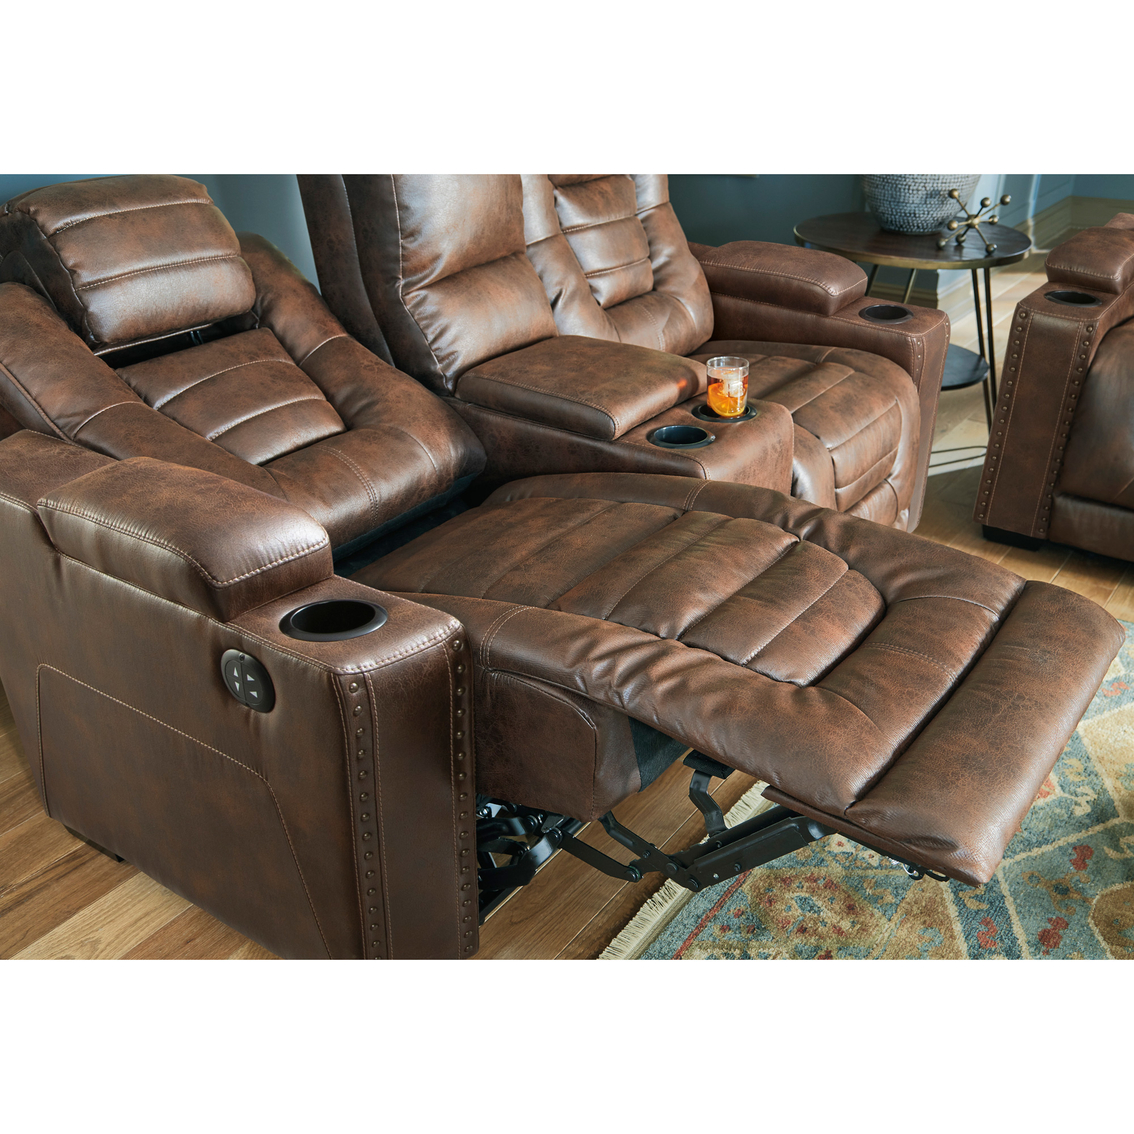 Signature Design by Ashley Owner's Box Power Reclining Adjustable Headrest Loveseat - Image 6 of 7